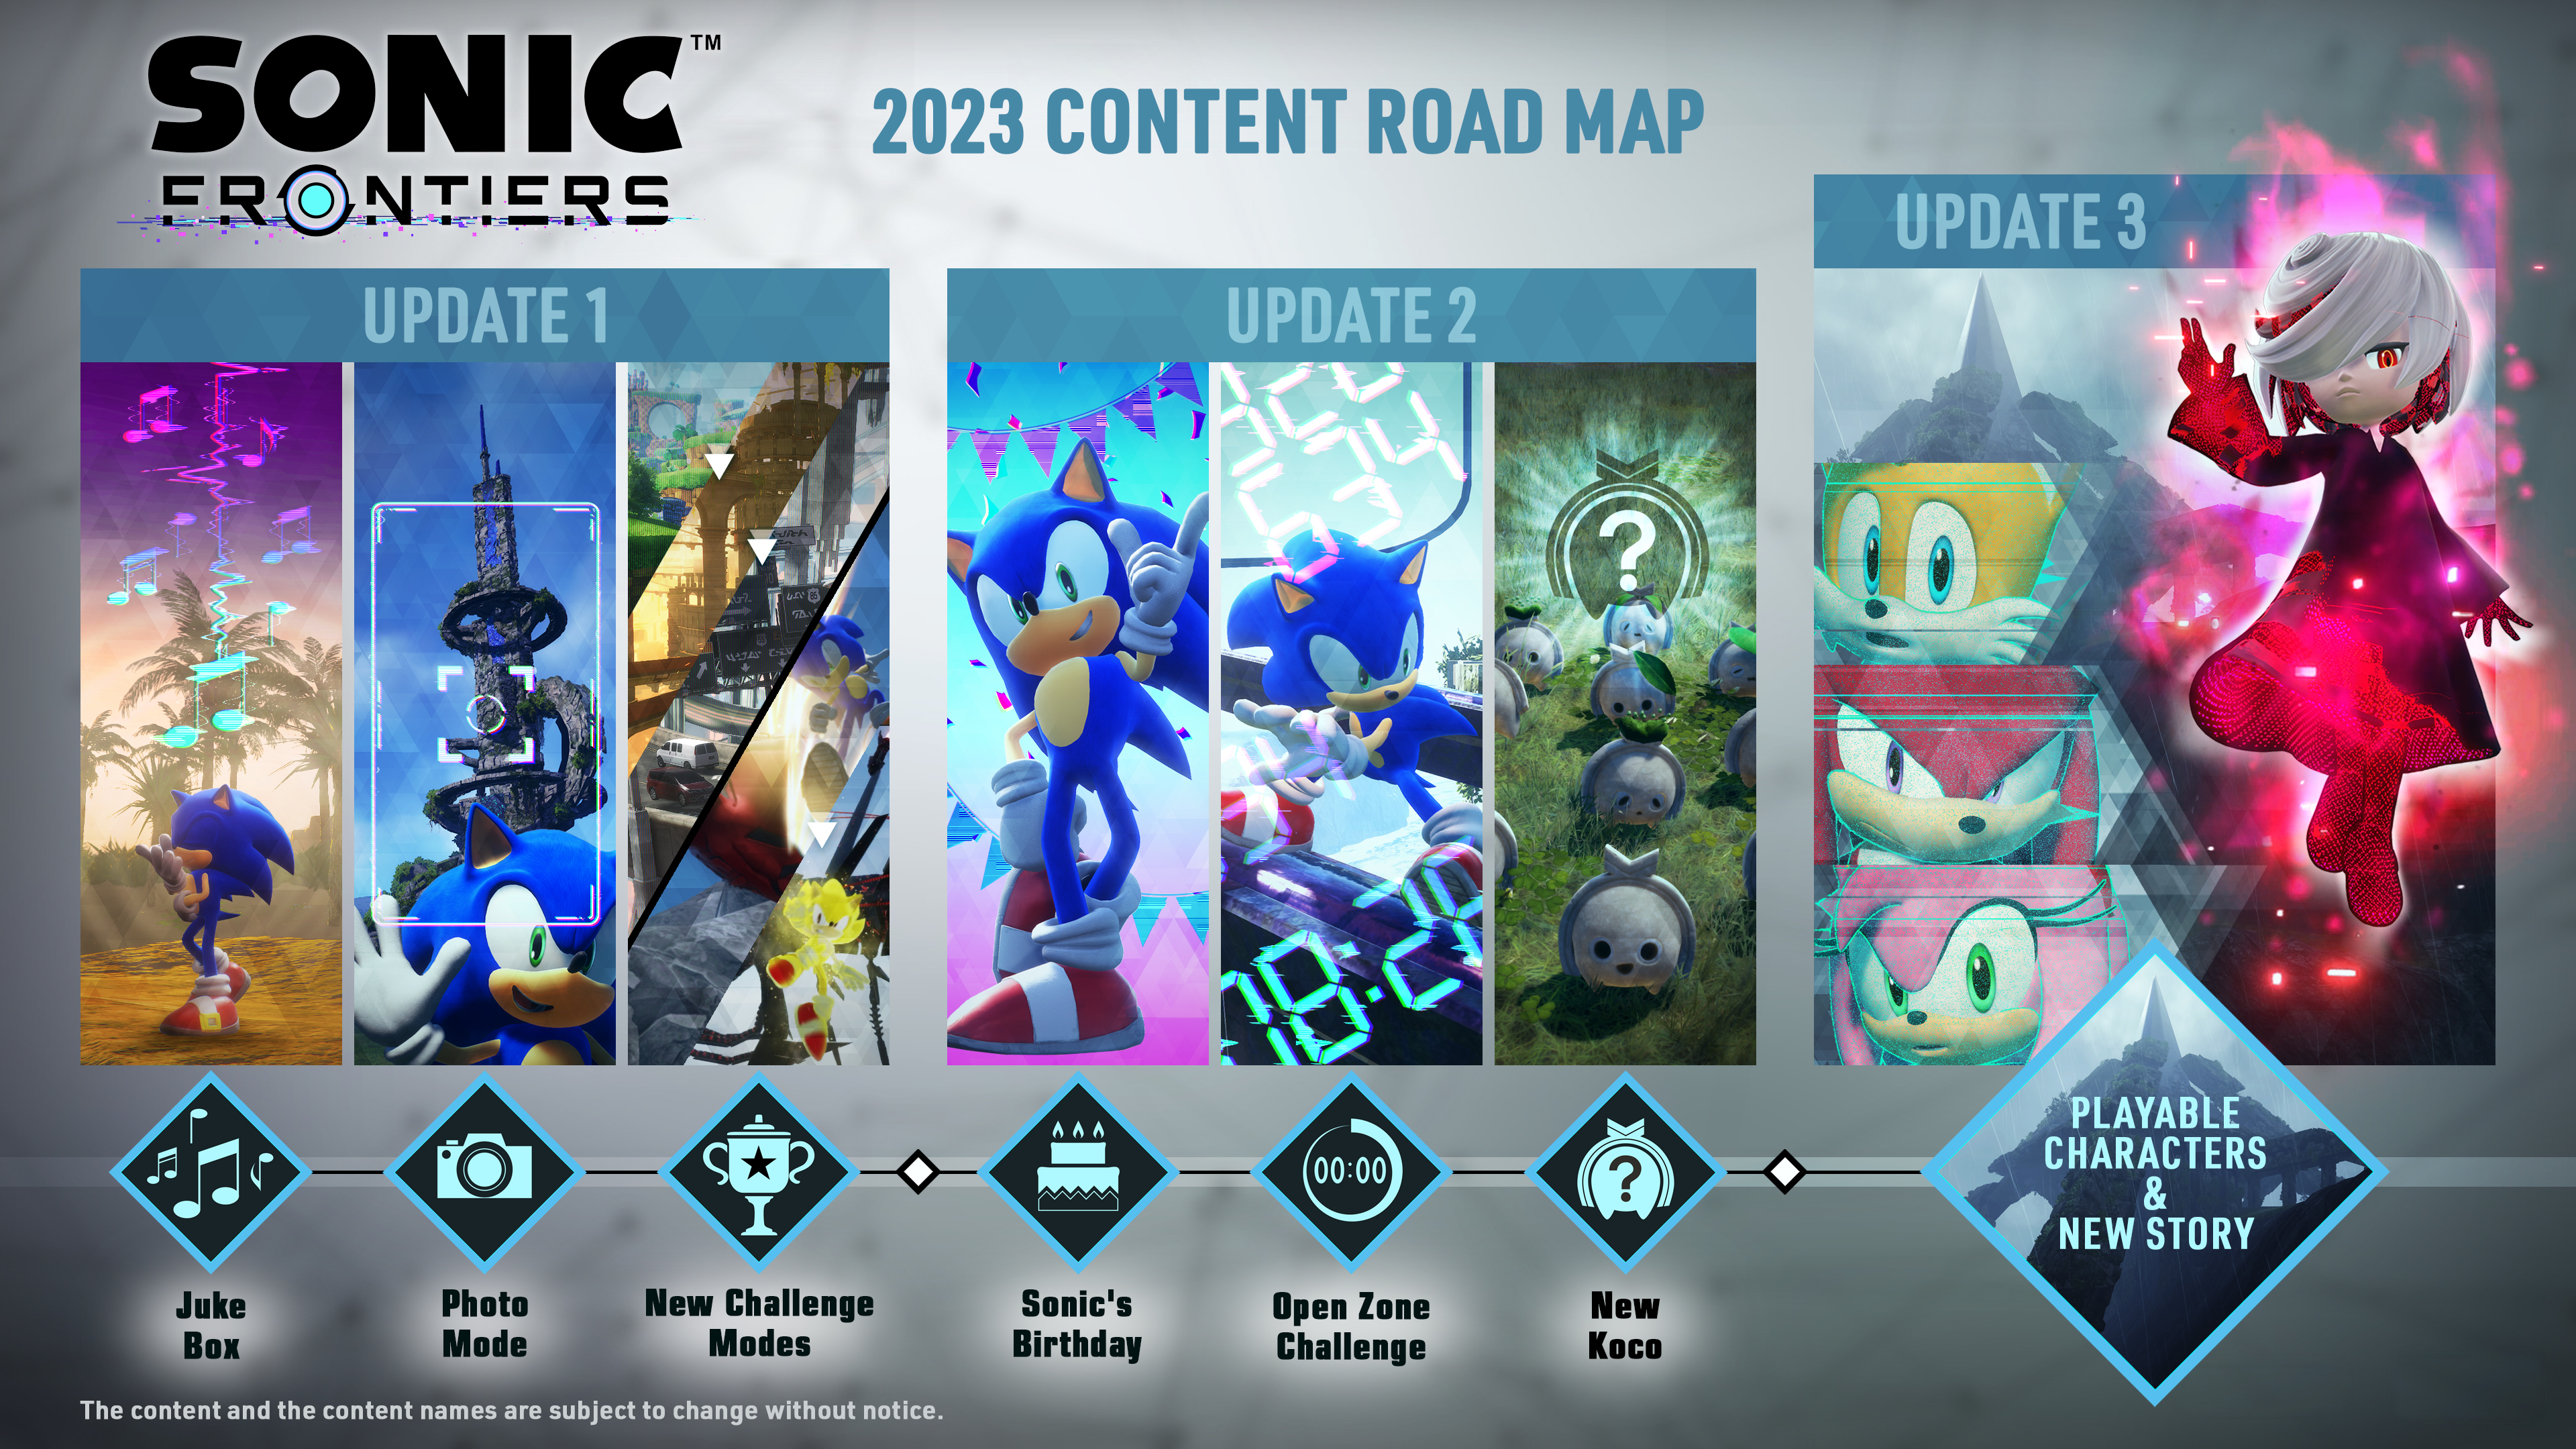 Sonic Frontiers Xbox Game Pass - Will it arrive in the